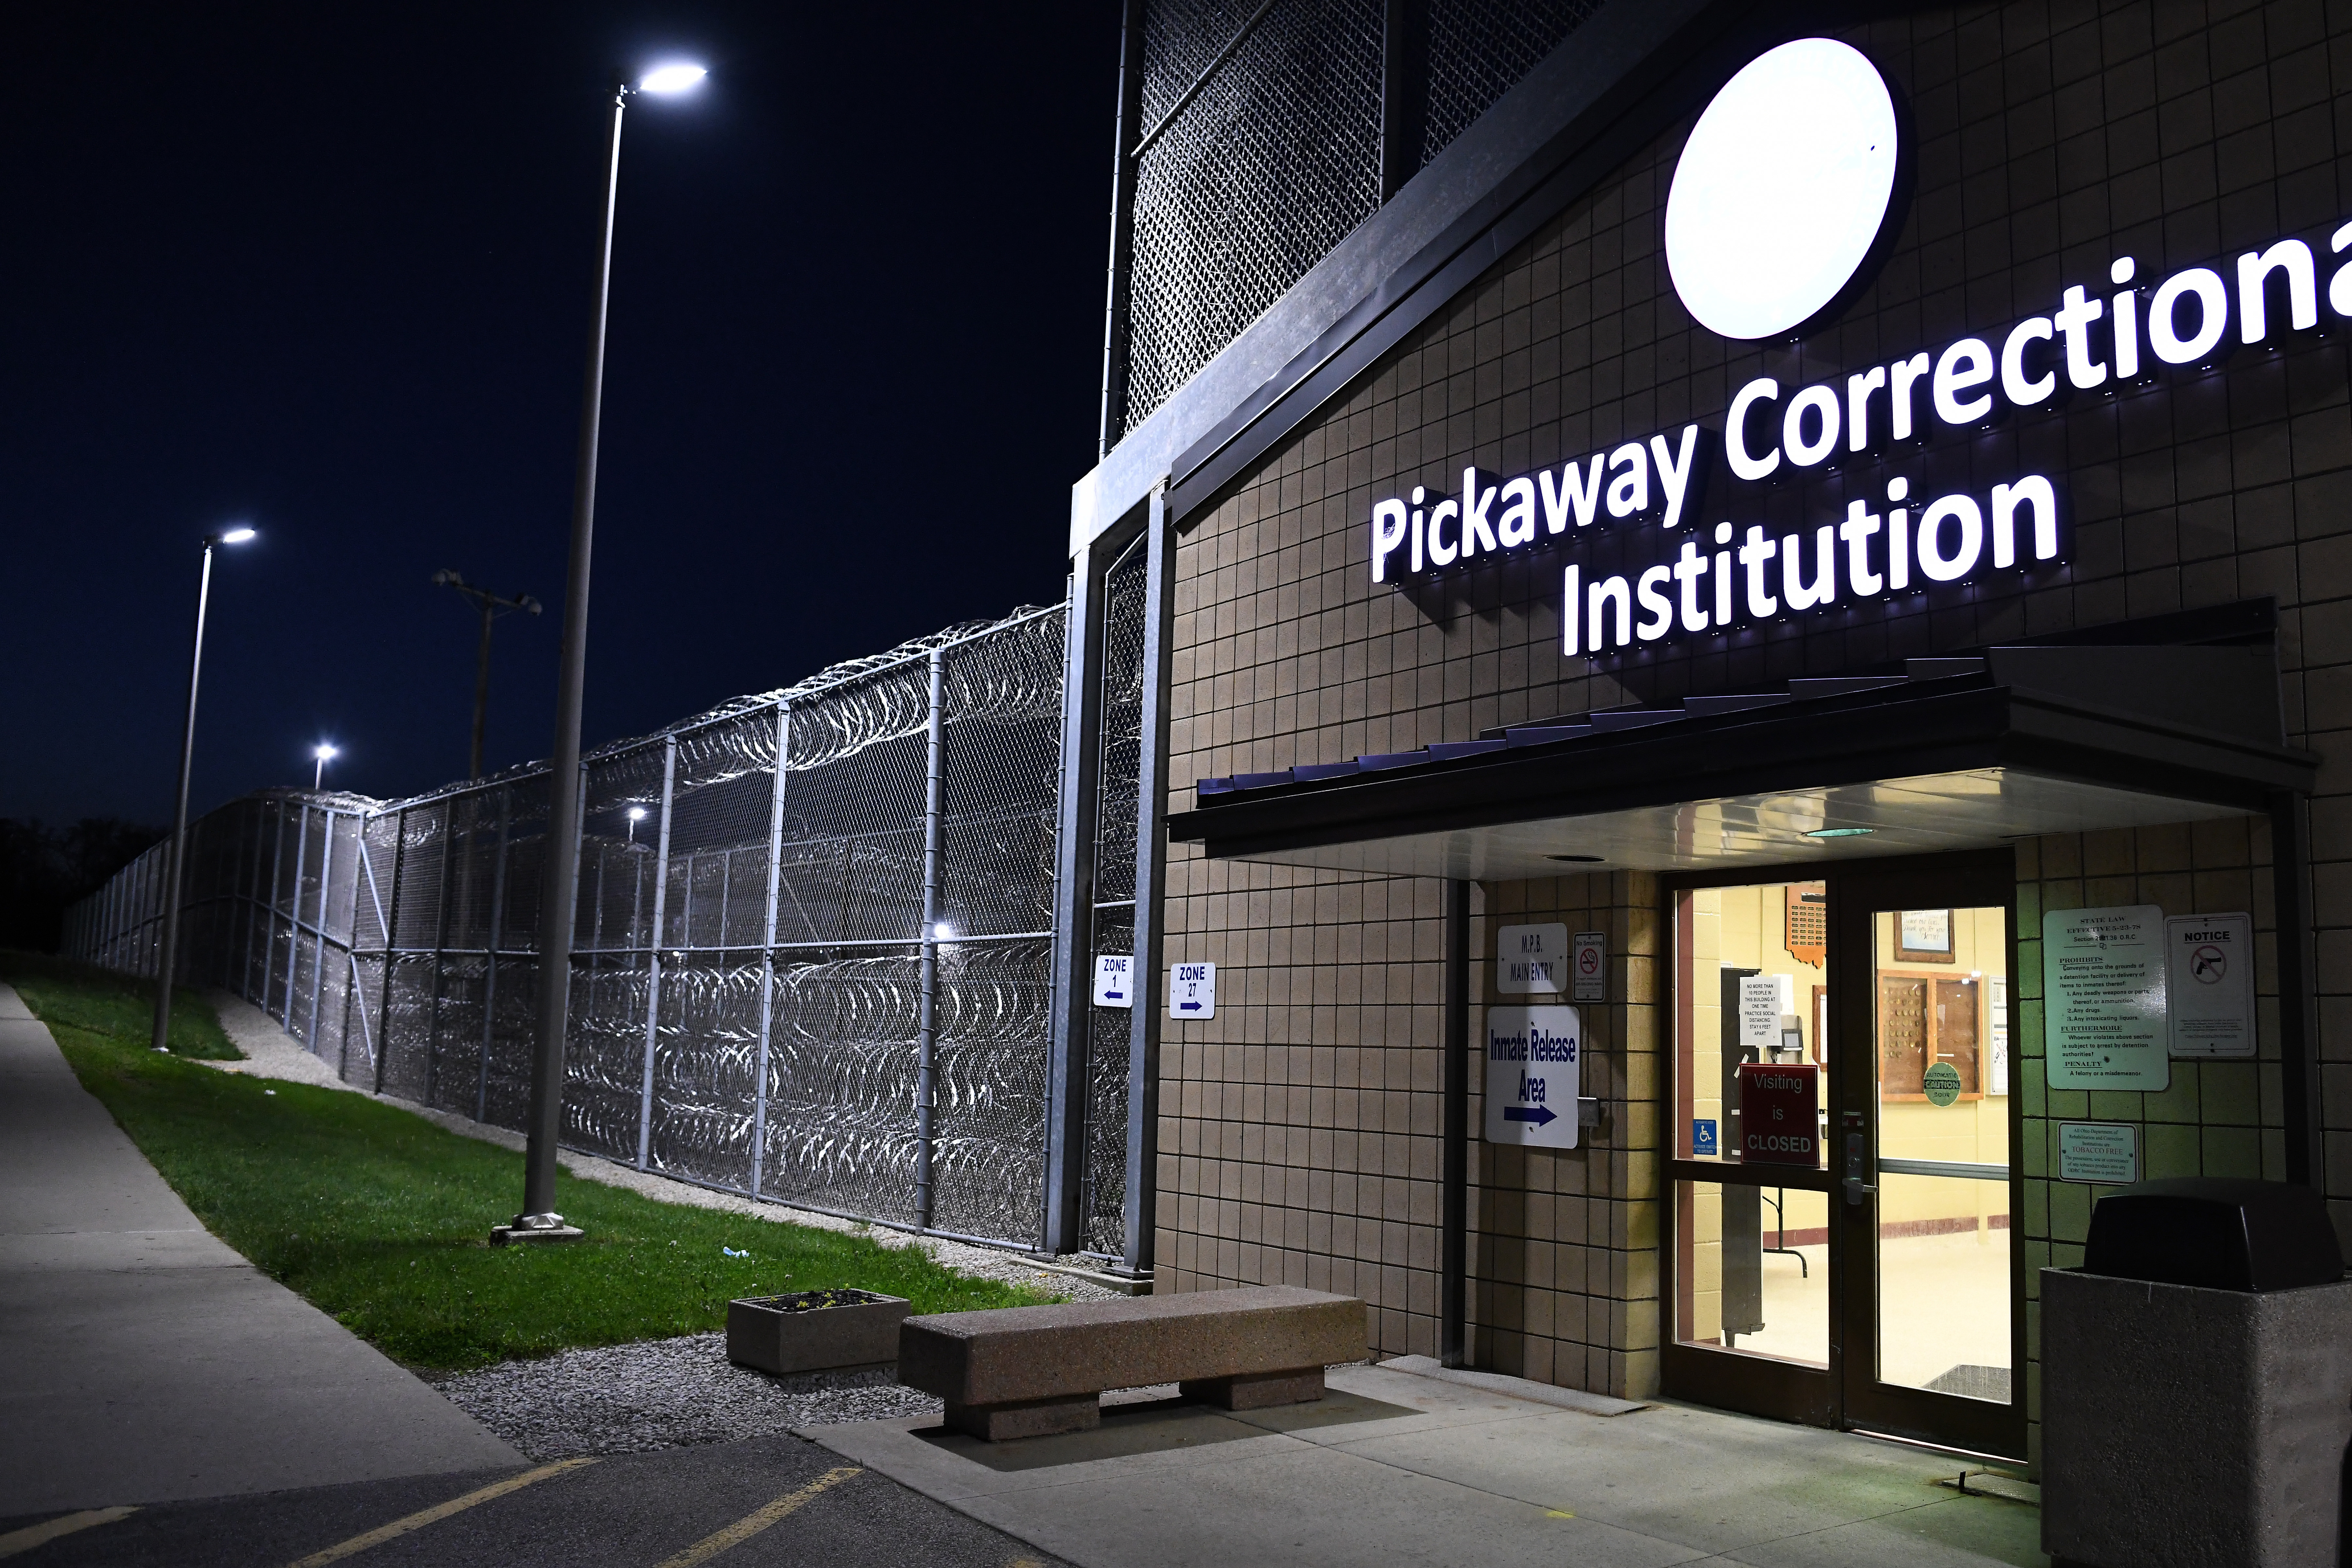 Pickaway Correctional Institution is pictured in the early hours of May 4, 2020, in Orient, Ohio. Joint Task Force Red Med, a team of nearly 30 Ohio National Guard Soldiers and Airmen, has been on duty since April 13 at PCI, supporting the onsite medical staff during the COVID-19 pandemic.